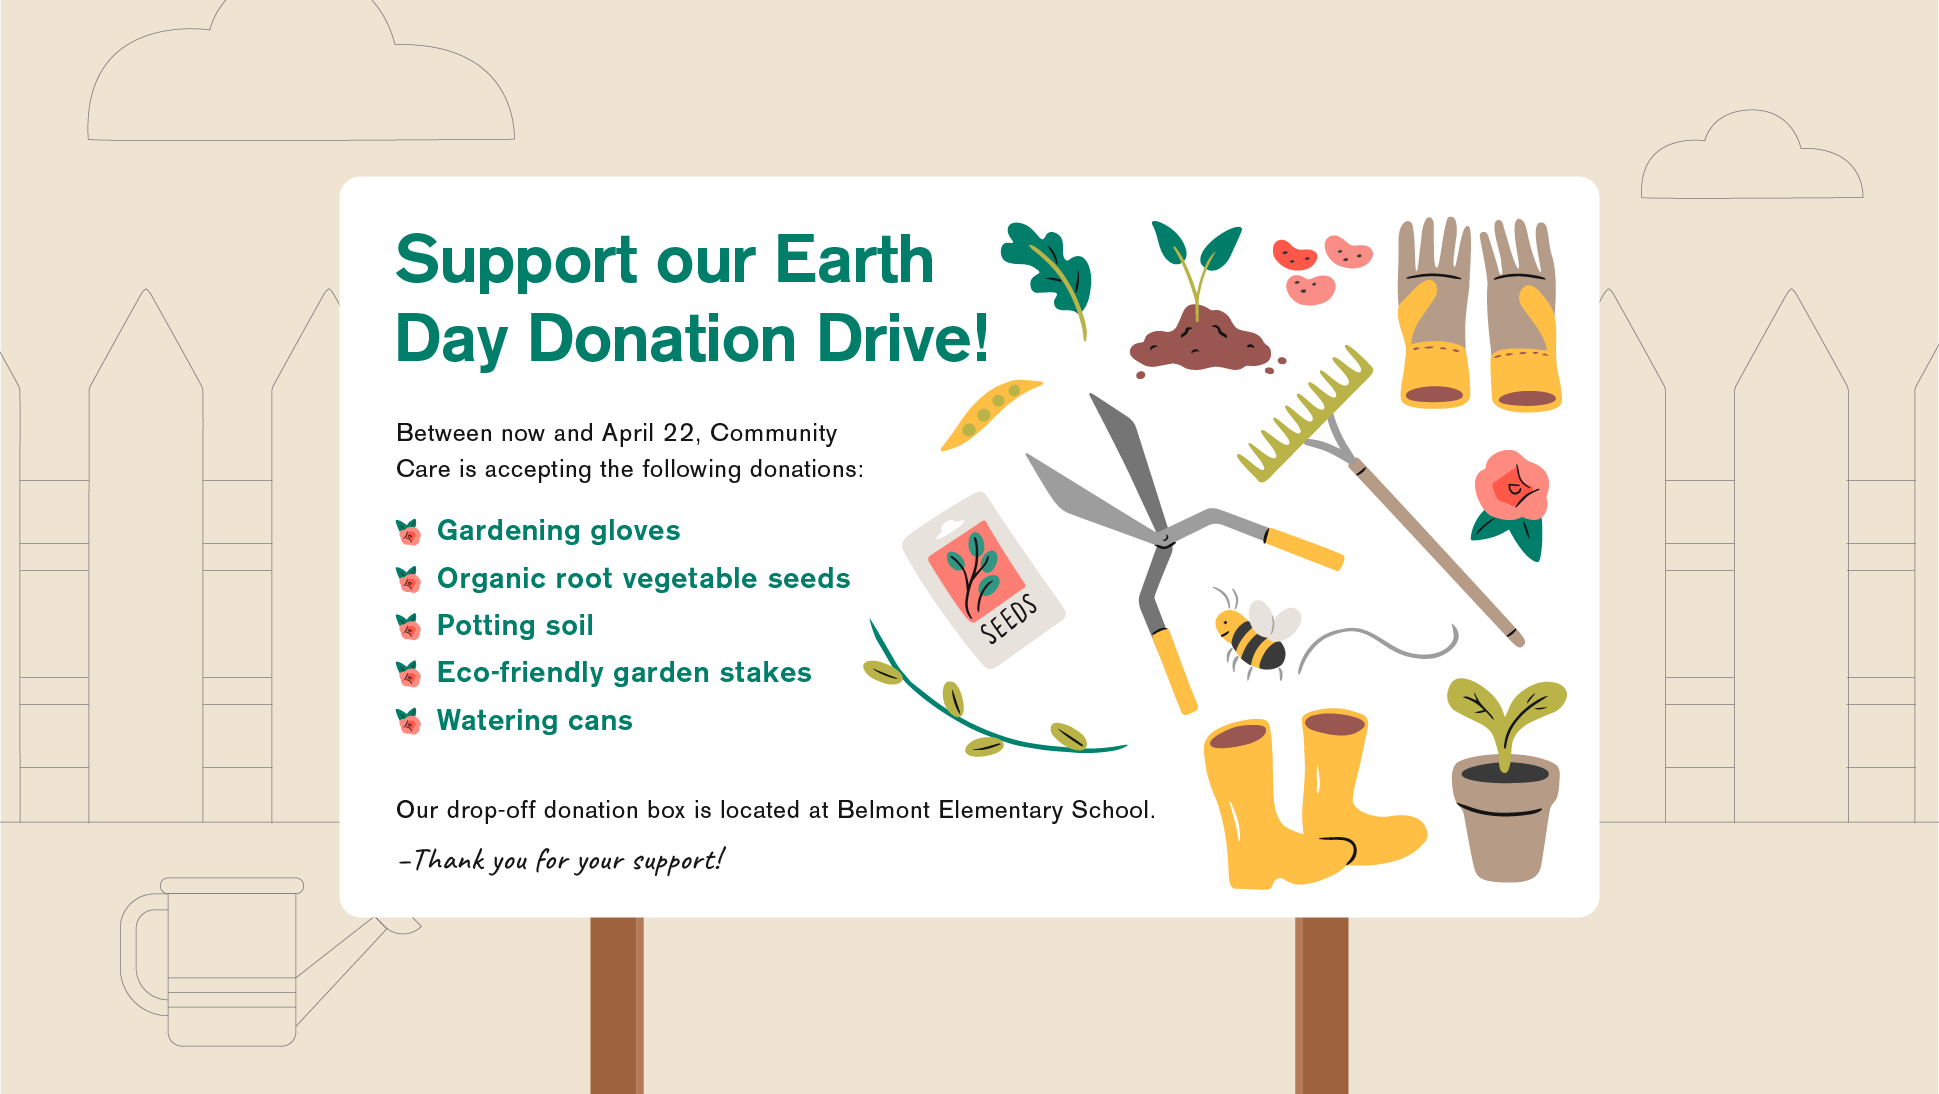 Marketing flyer for earth day donation drive